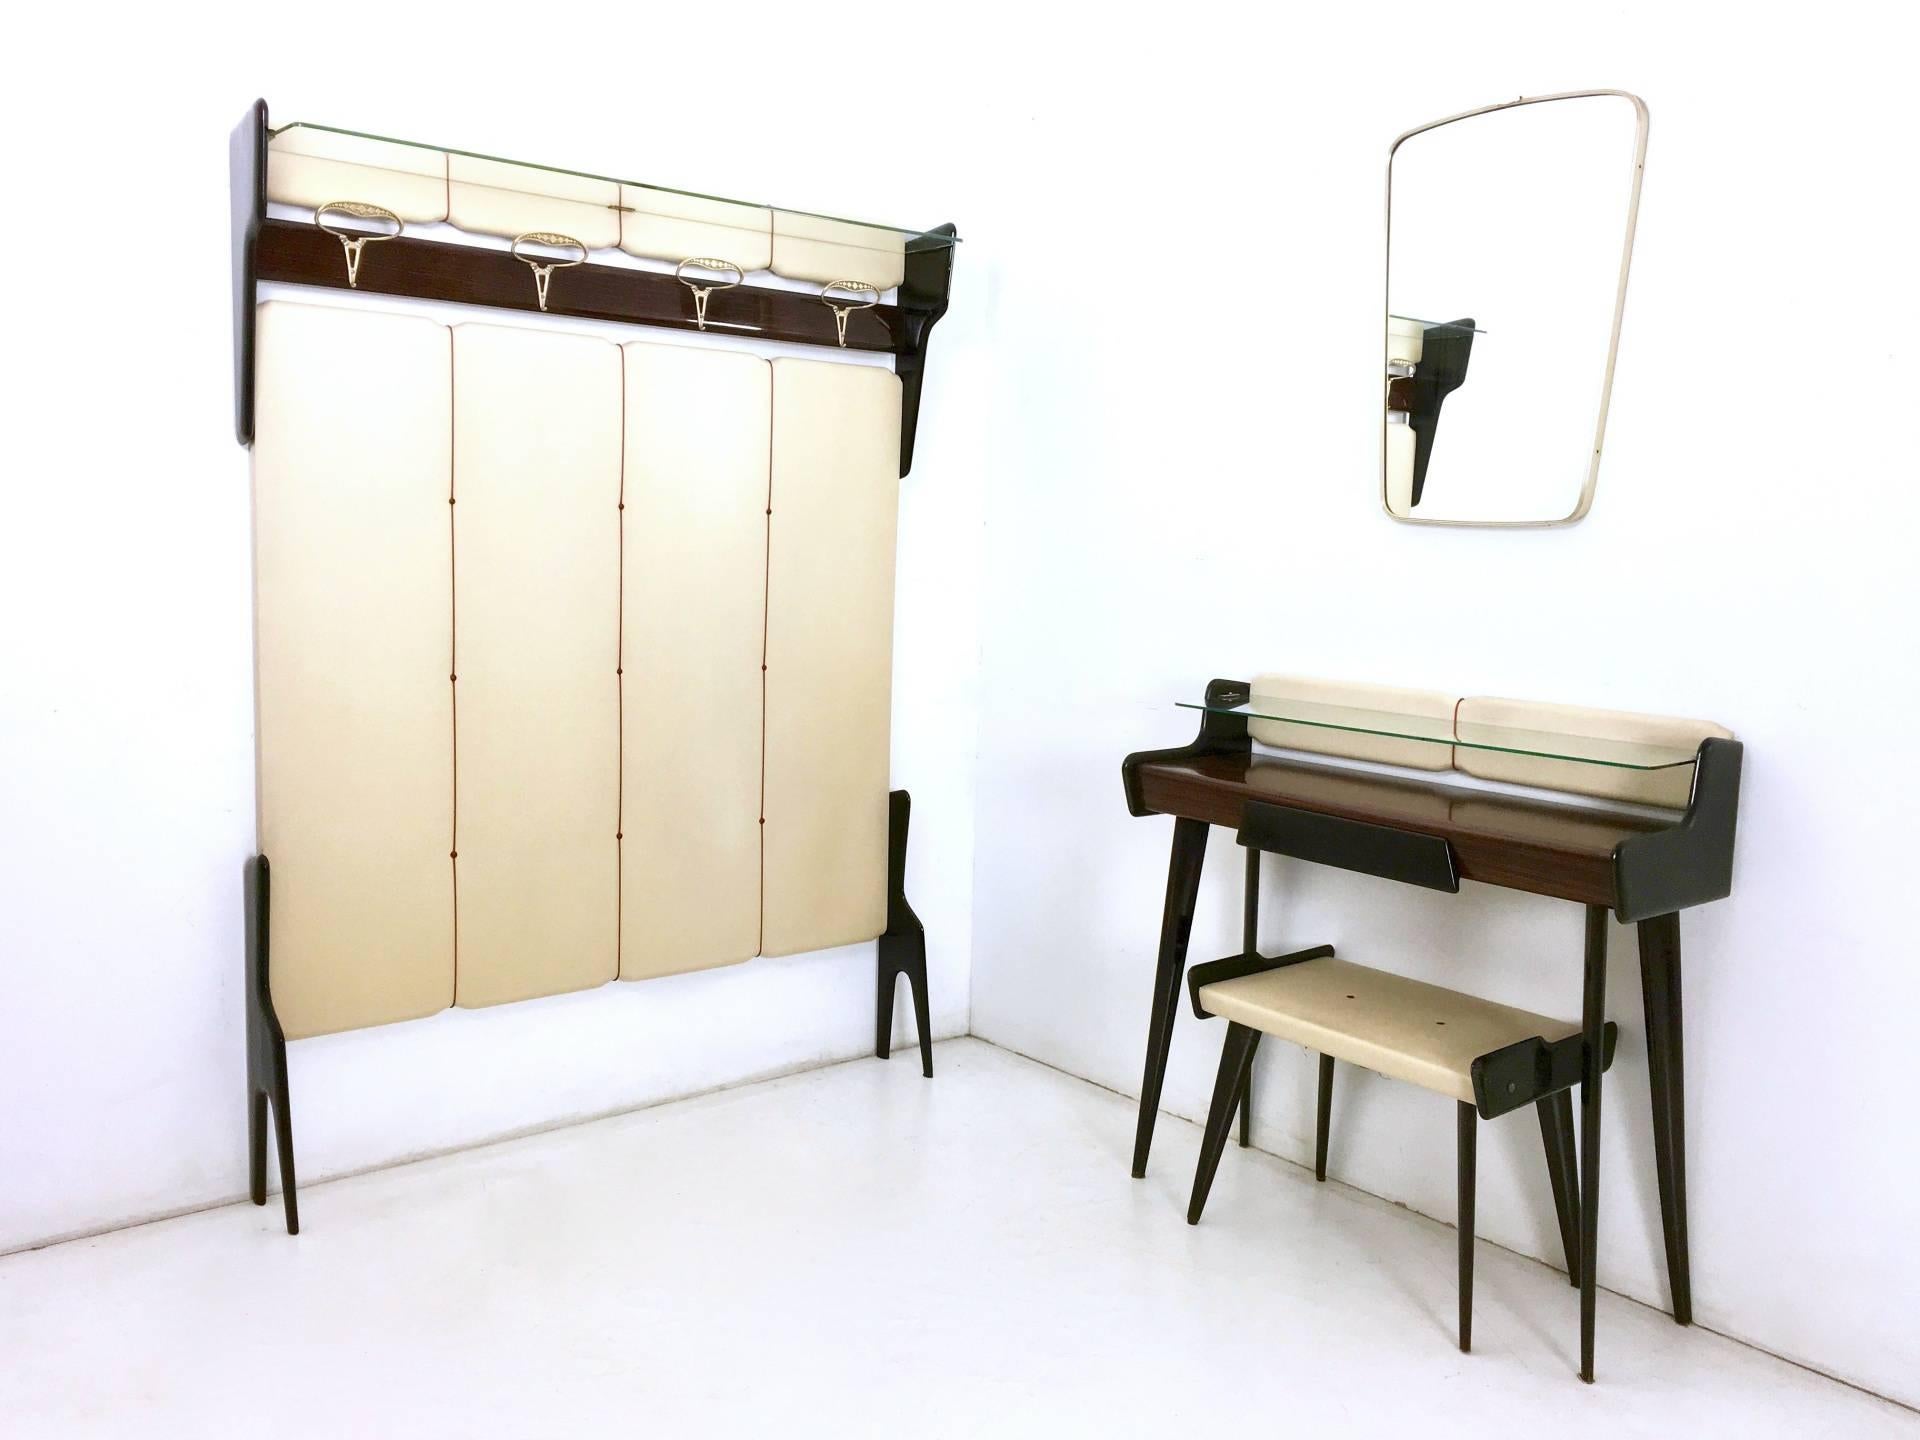 Made in ebonized beech, glass, brass and vintage skai.
In very good original condition.

The coat rack and the wall mirror are for illustrative purposes only (they are available on our storefront on 1stdibs).

Console: 94 x 32 H 92 cm
Pouf: 56 x 39